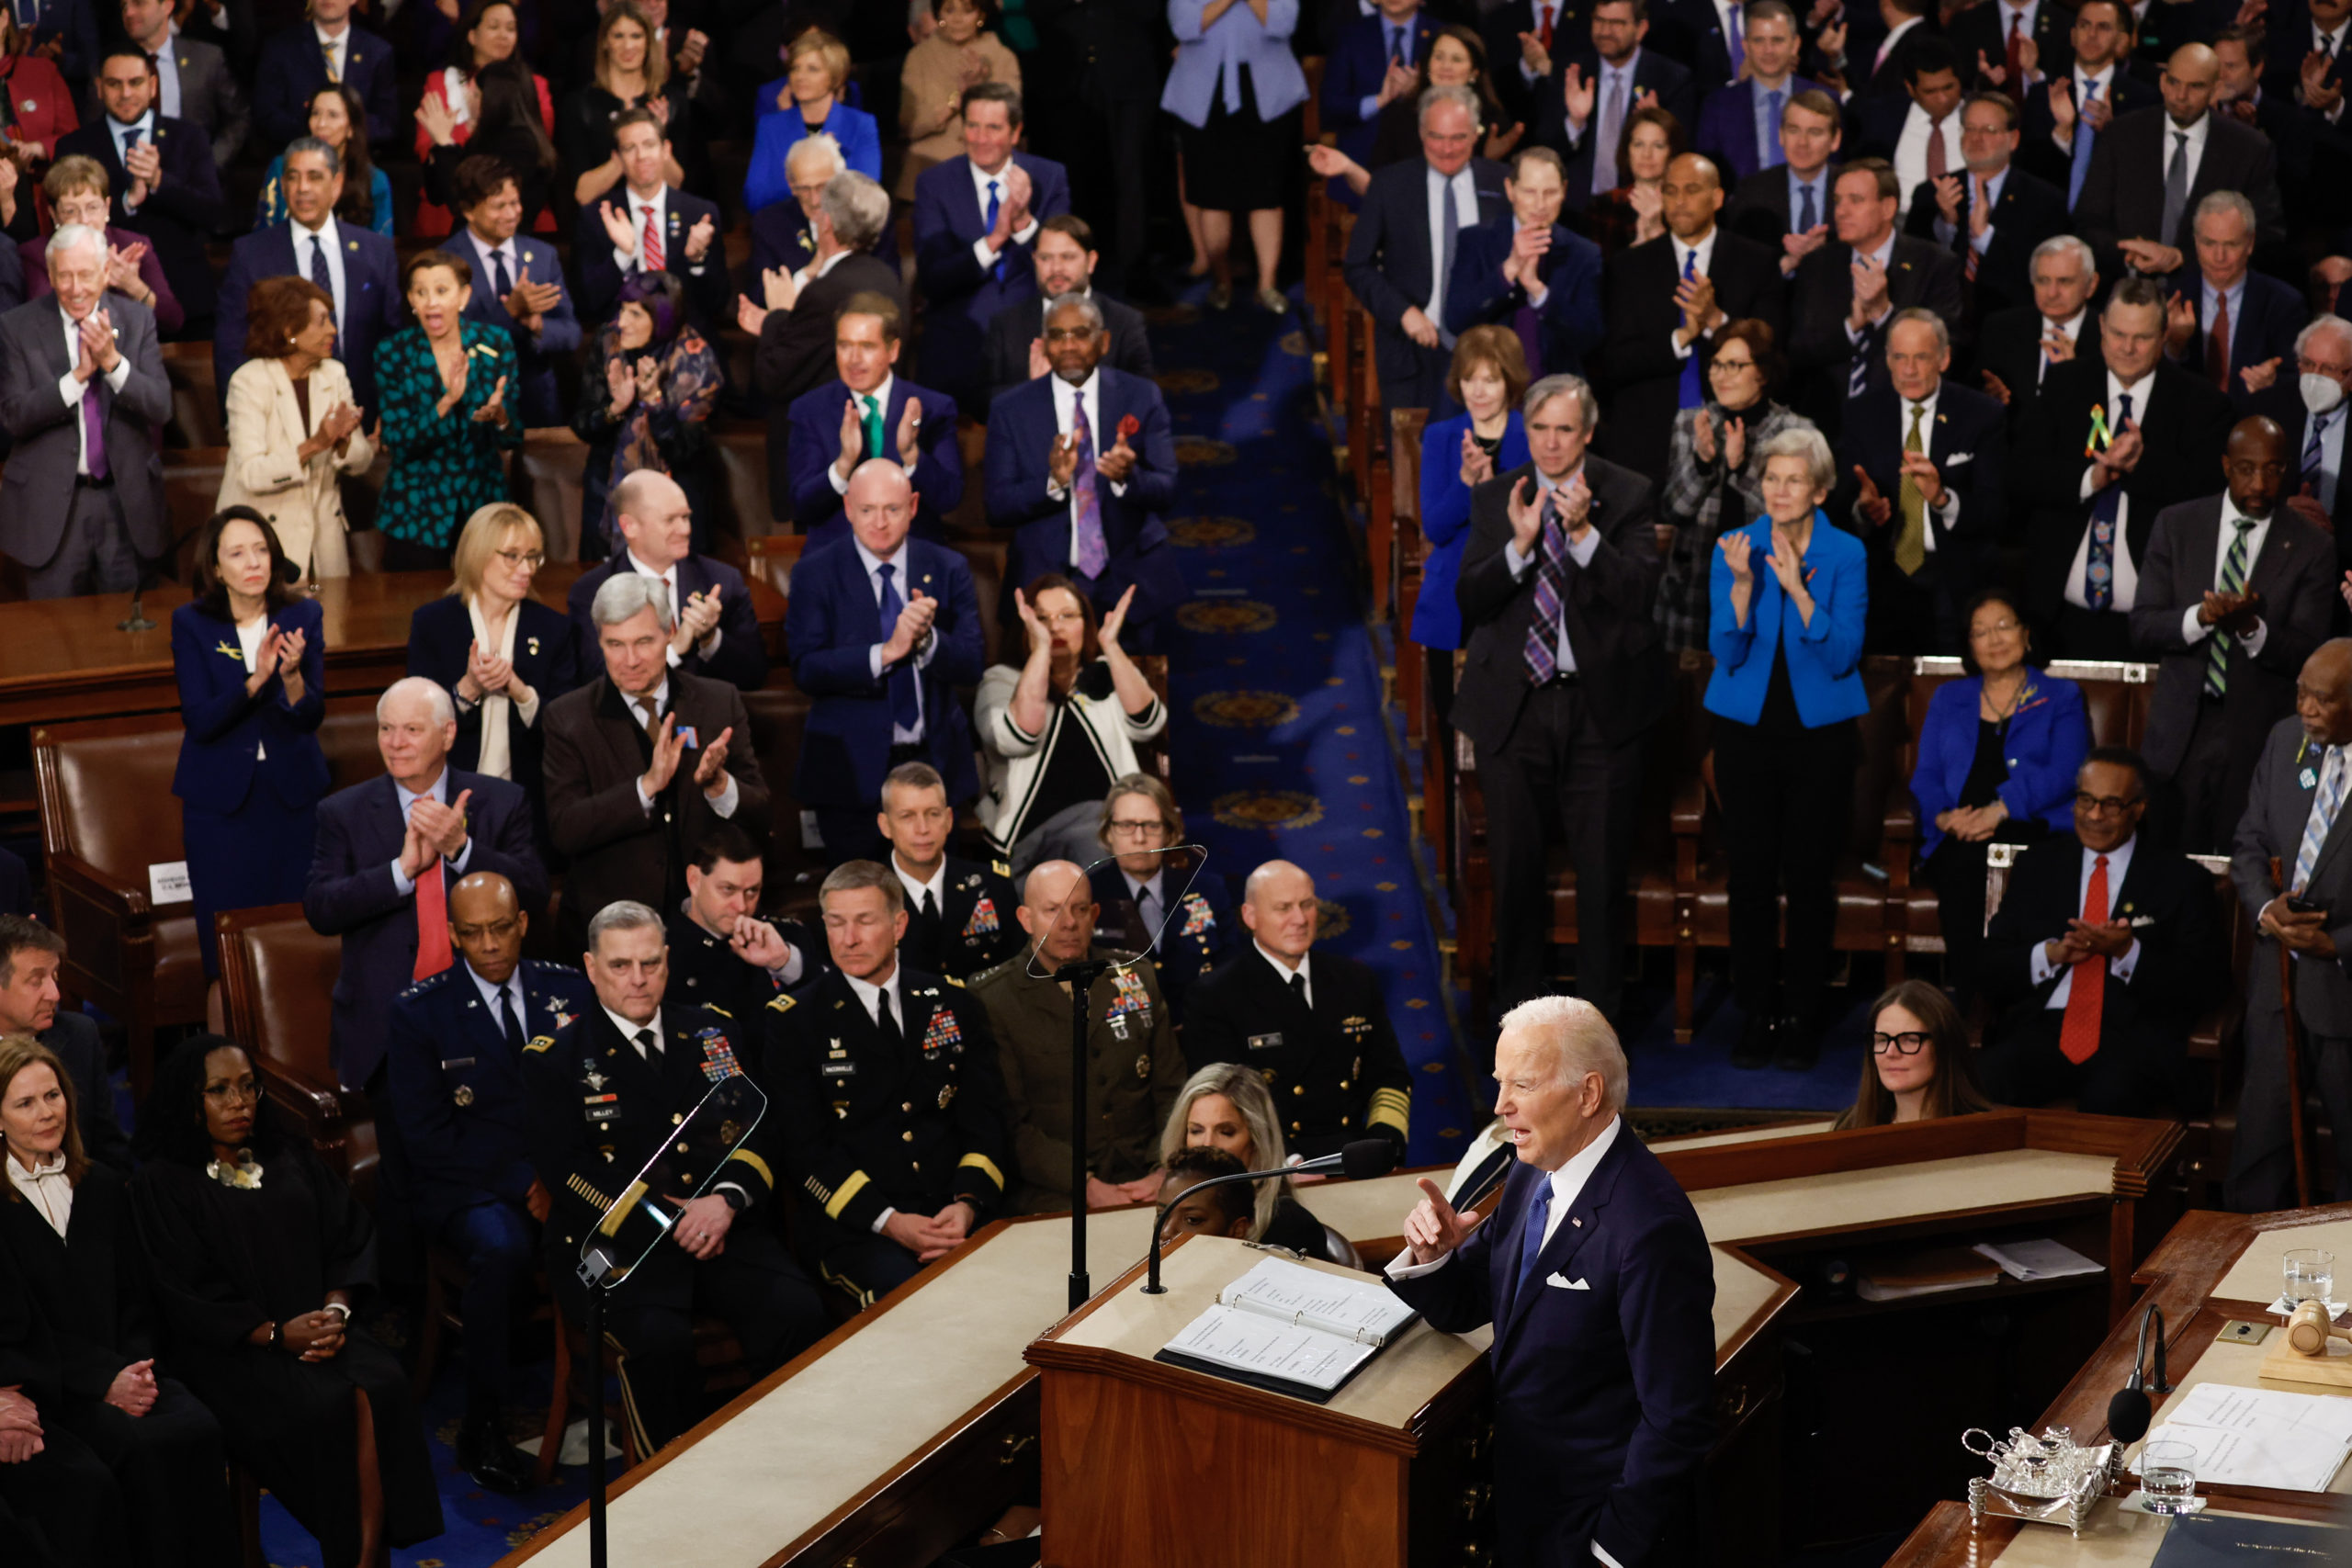 U.S. President Joe Biden delivers his State of the Union address during a joint meeting of Congress in the House Chamber of the U.S. Capitol on February 07, 2023 in Washington, DC. The speech marks Biden's first address to the new Republican-controlled House. (Photo by Chip Somodevilla/Getty Images)